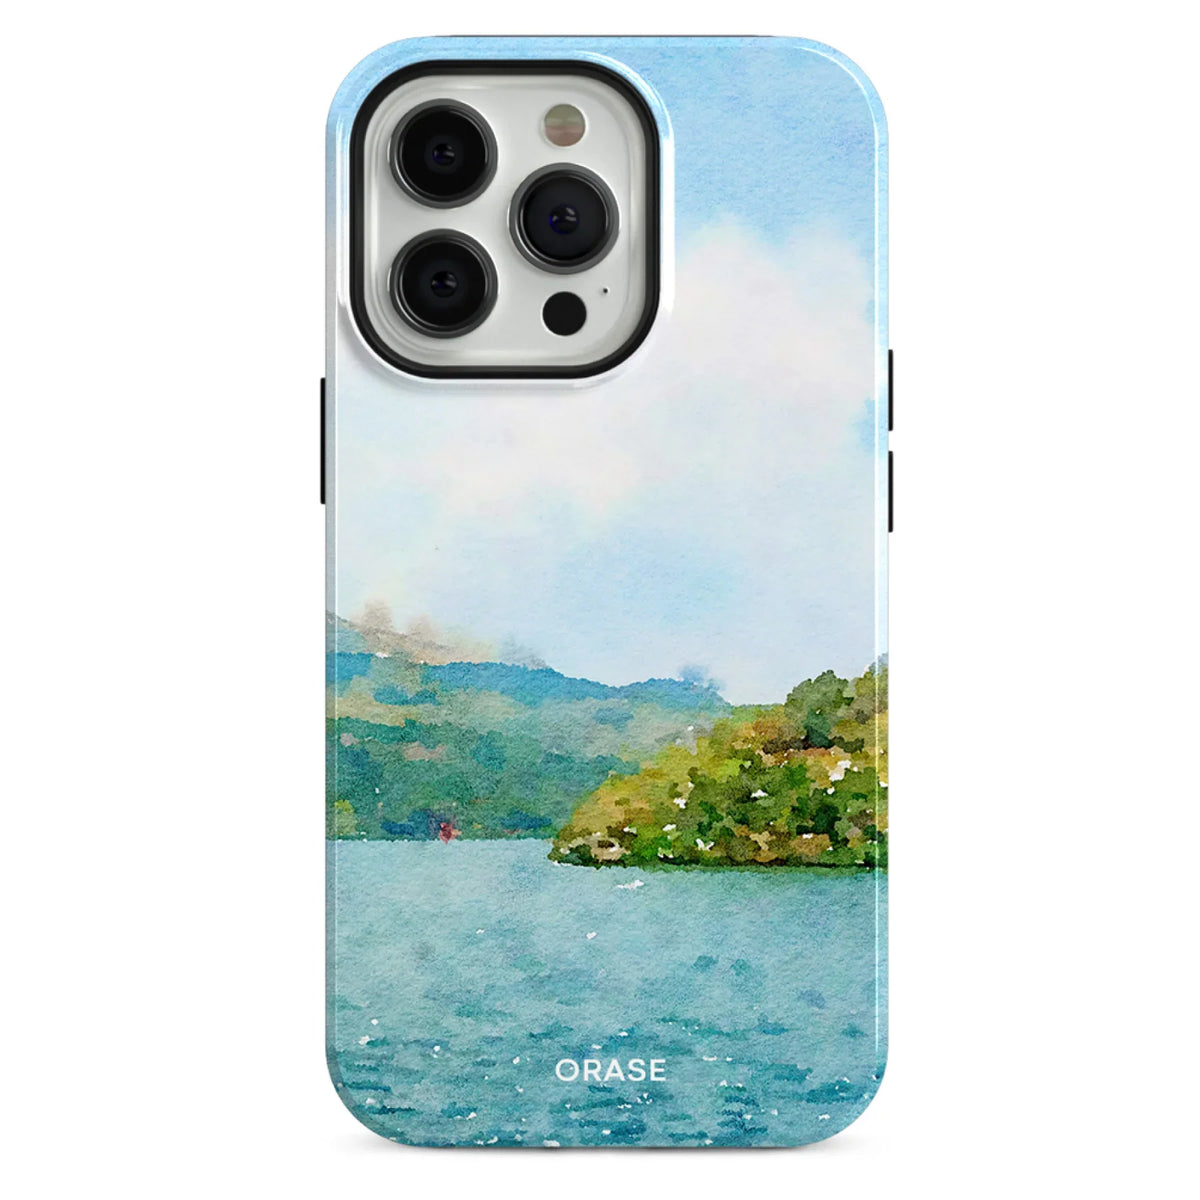 Dreams Time iPhone Case - iPhone 11 Pro